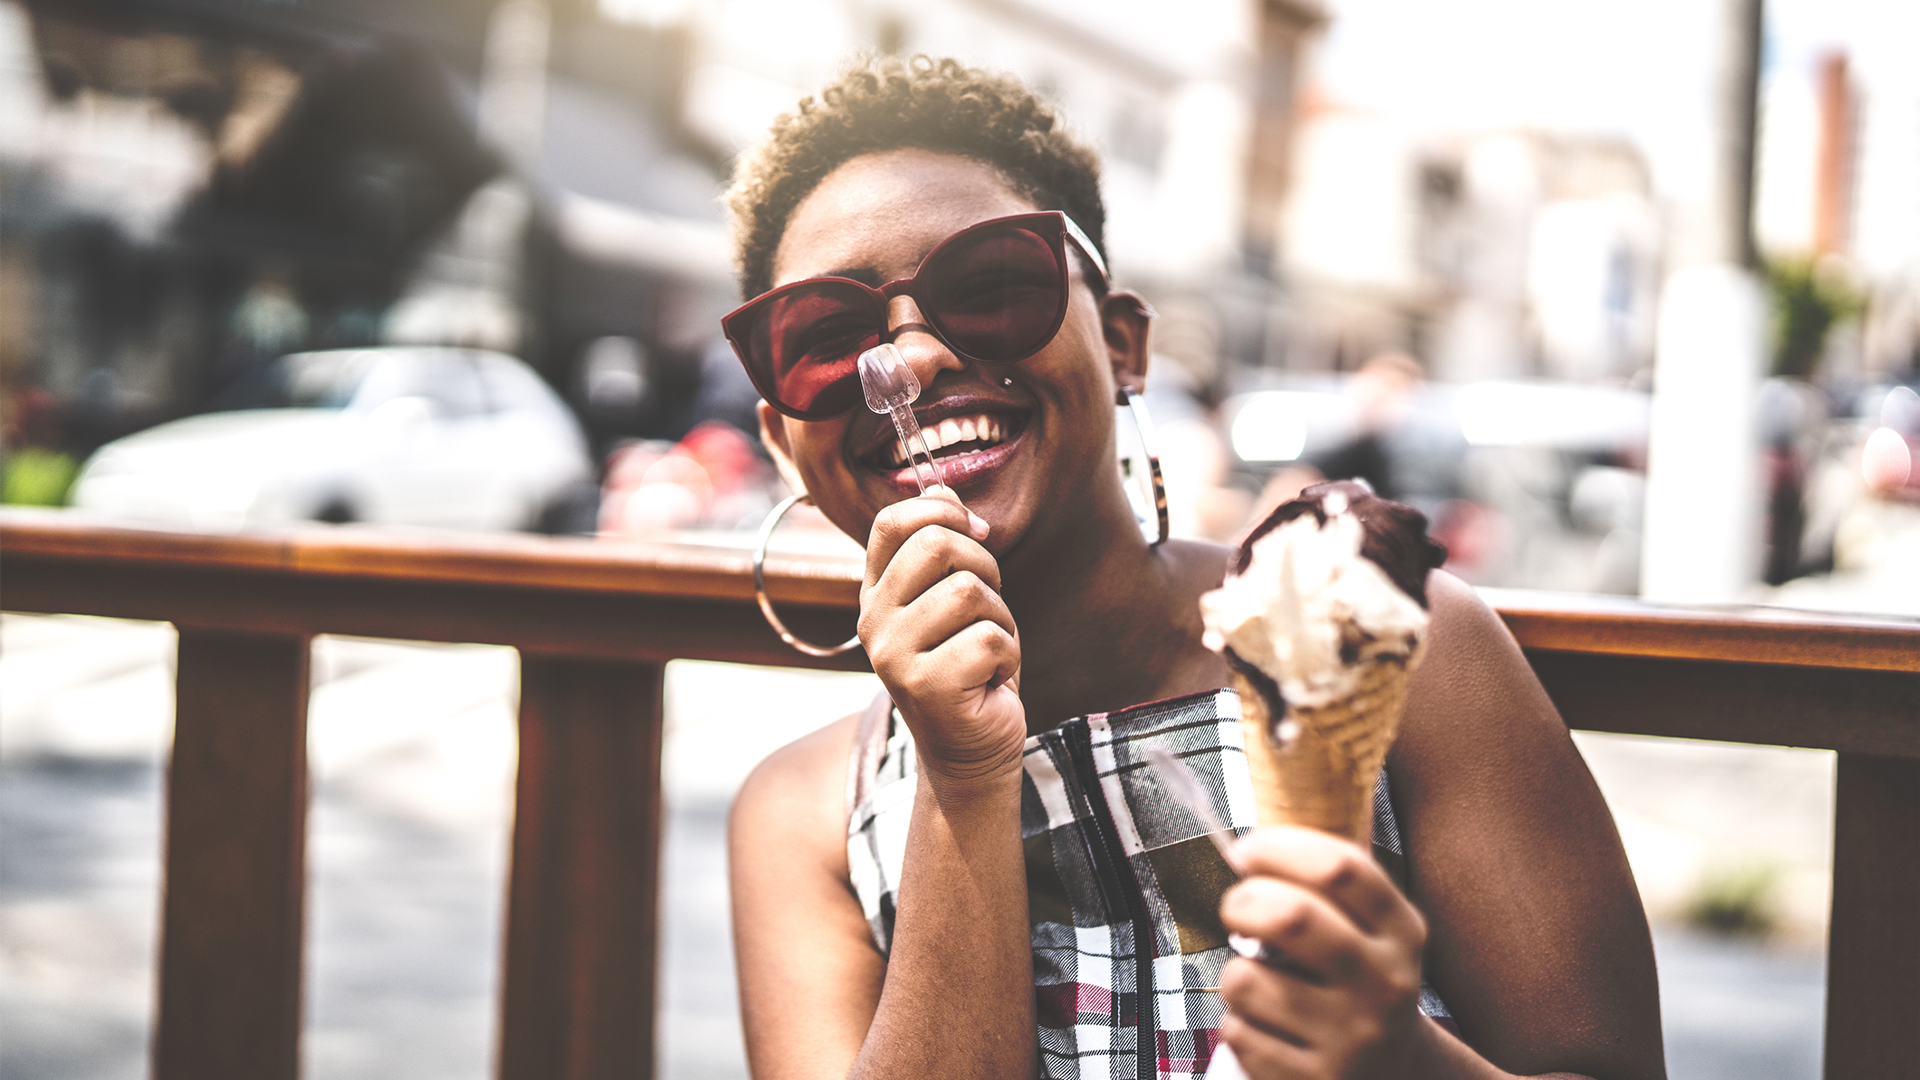 10 Black-Owned Ice Cream Businesses To Support On National Ice Cream Day